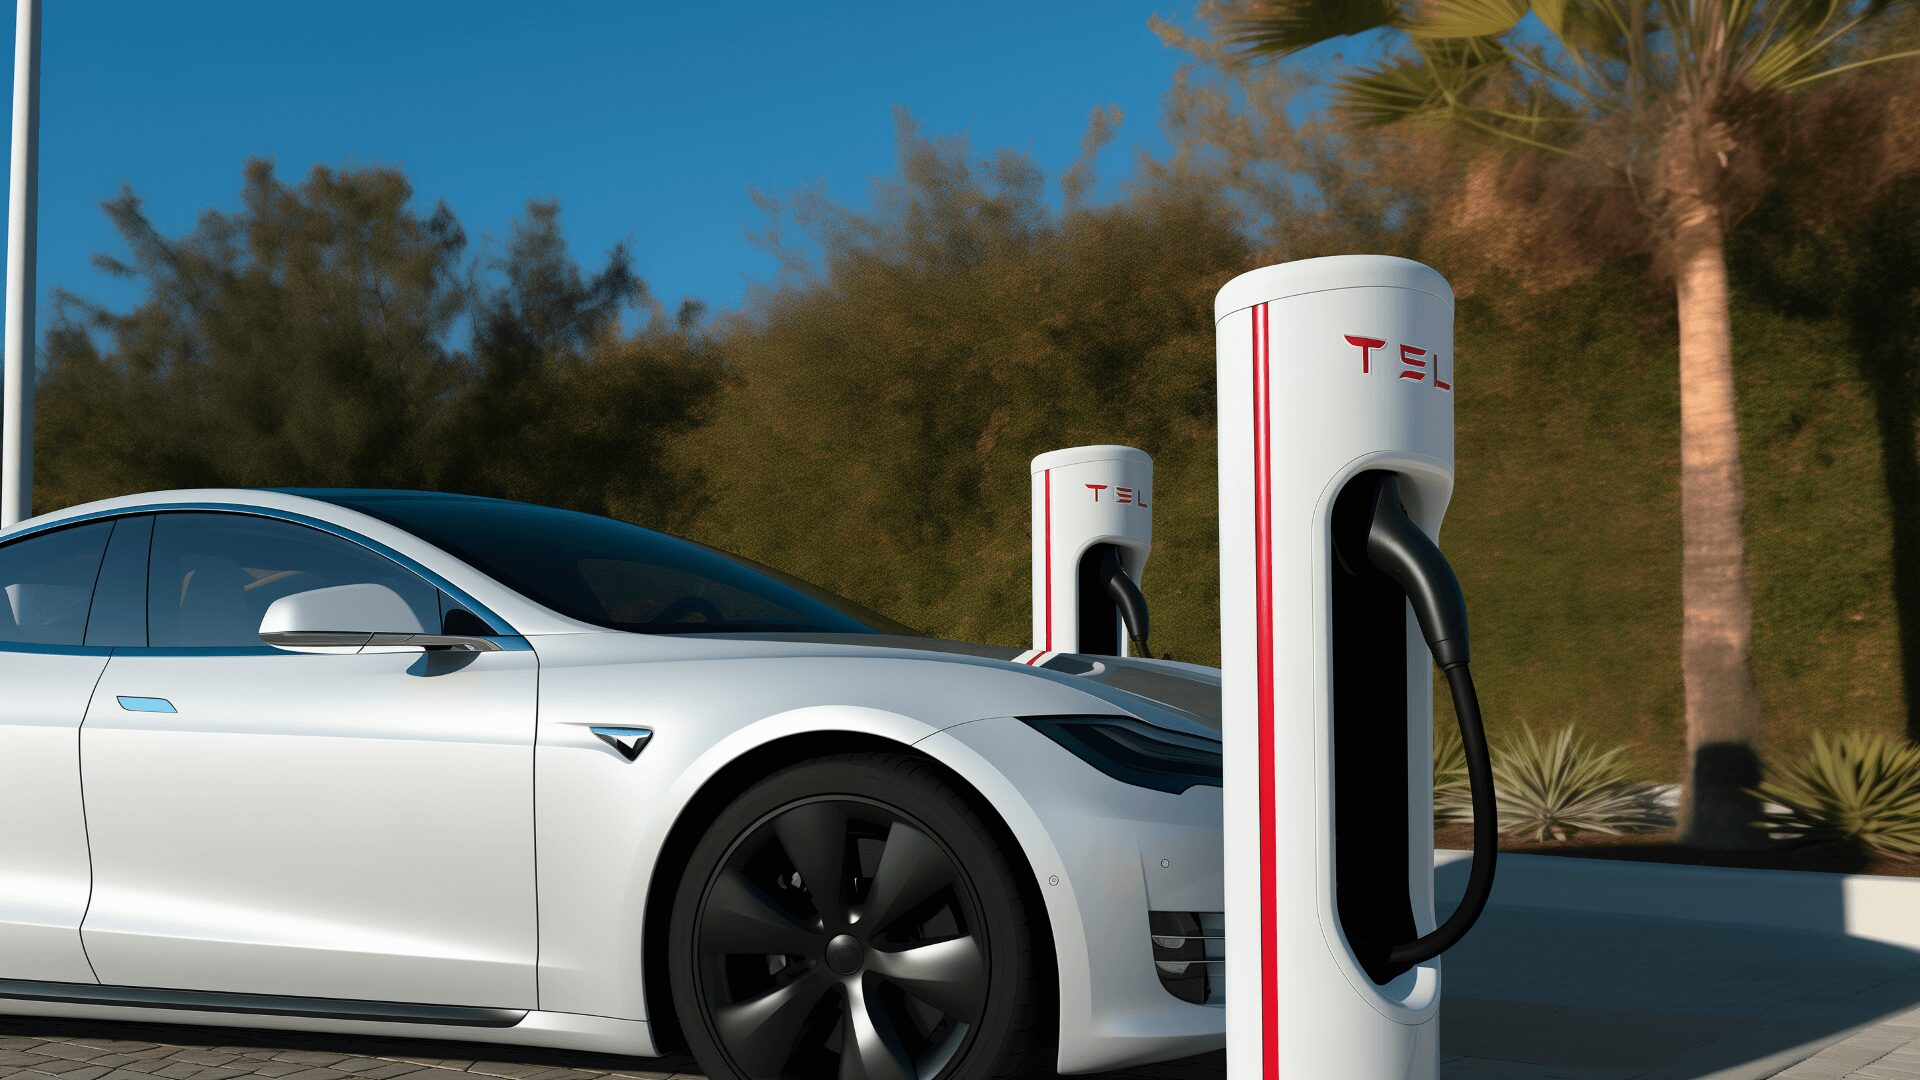 tesla electric vehicle manufacturing prioritizes modern design, advanced technology and charging systems